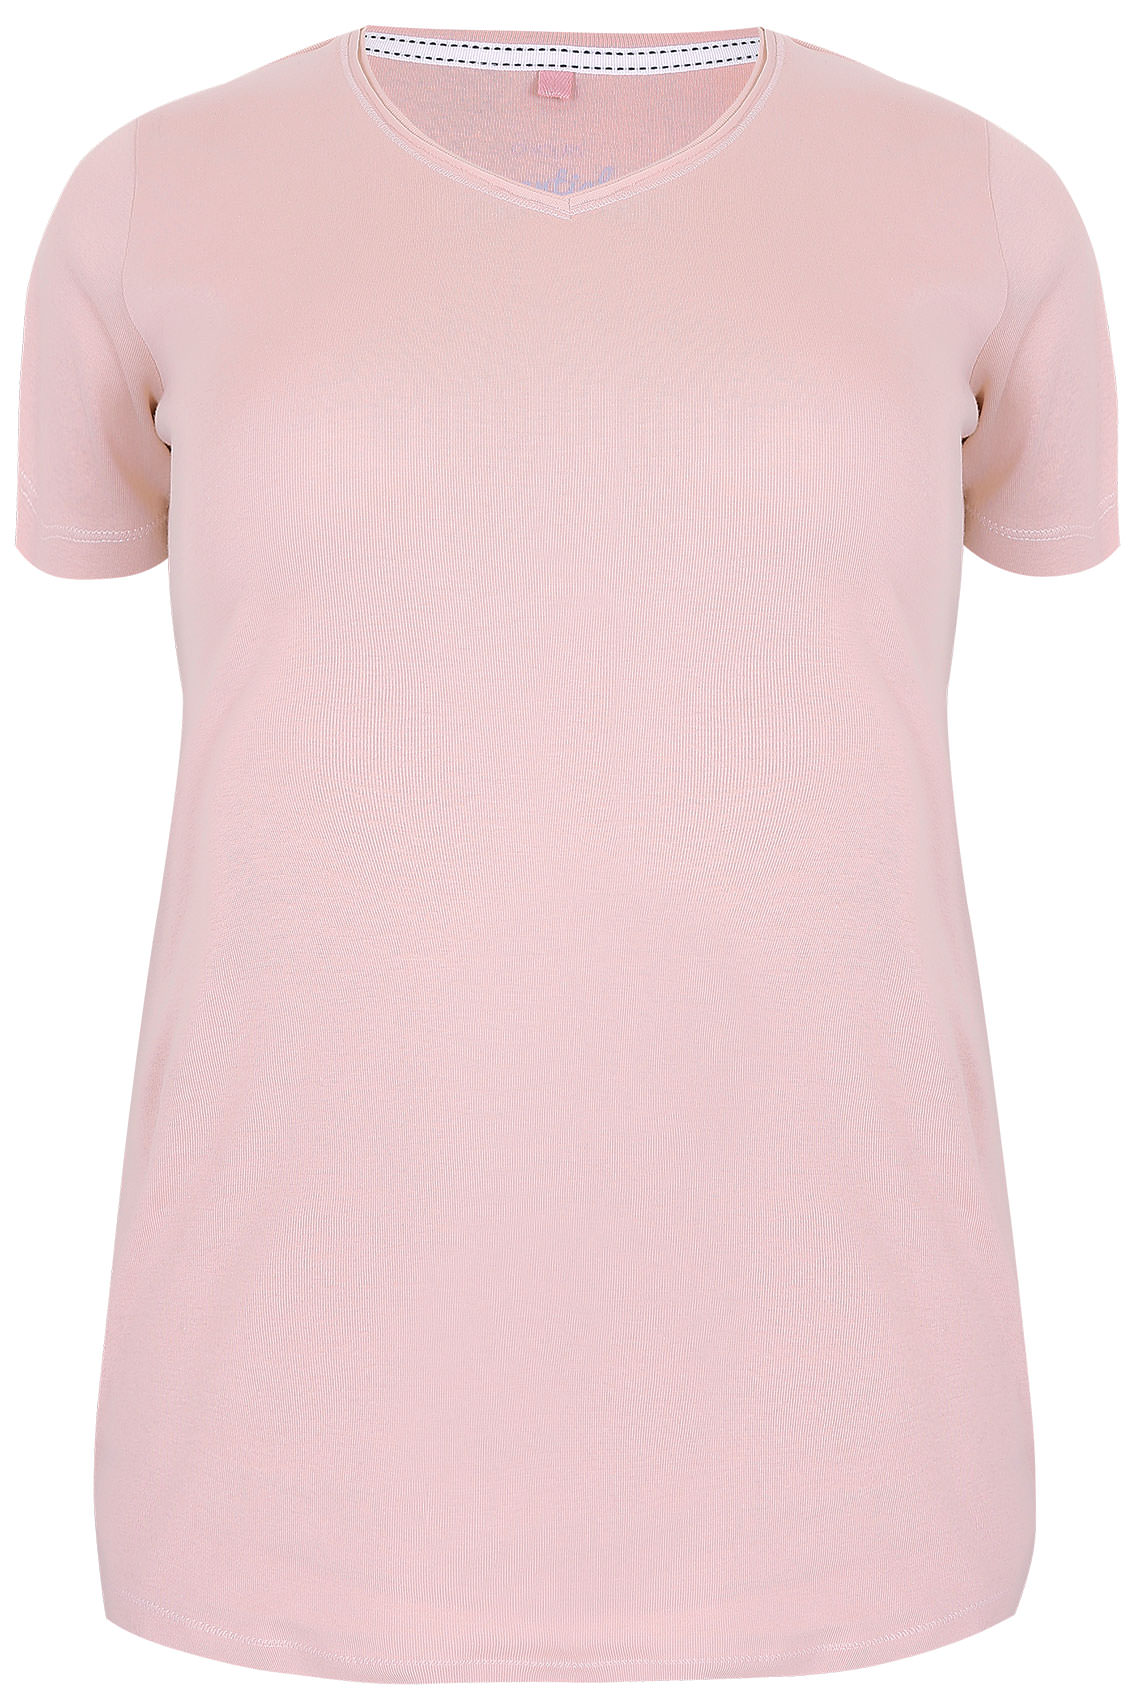 Y0urs Yours Blush Pink Pure Cotton Ribbed V Neck T Shirt Plus Size 18 To 30 32